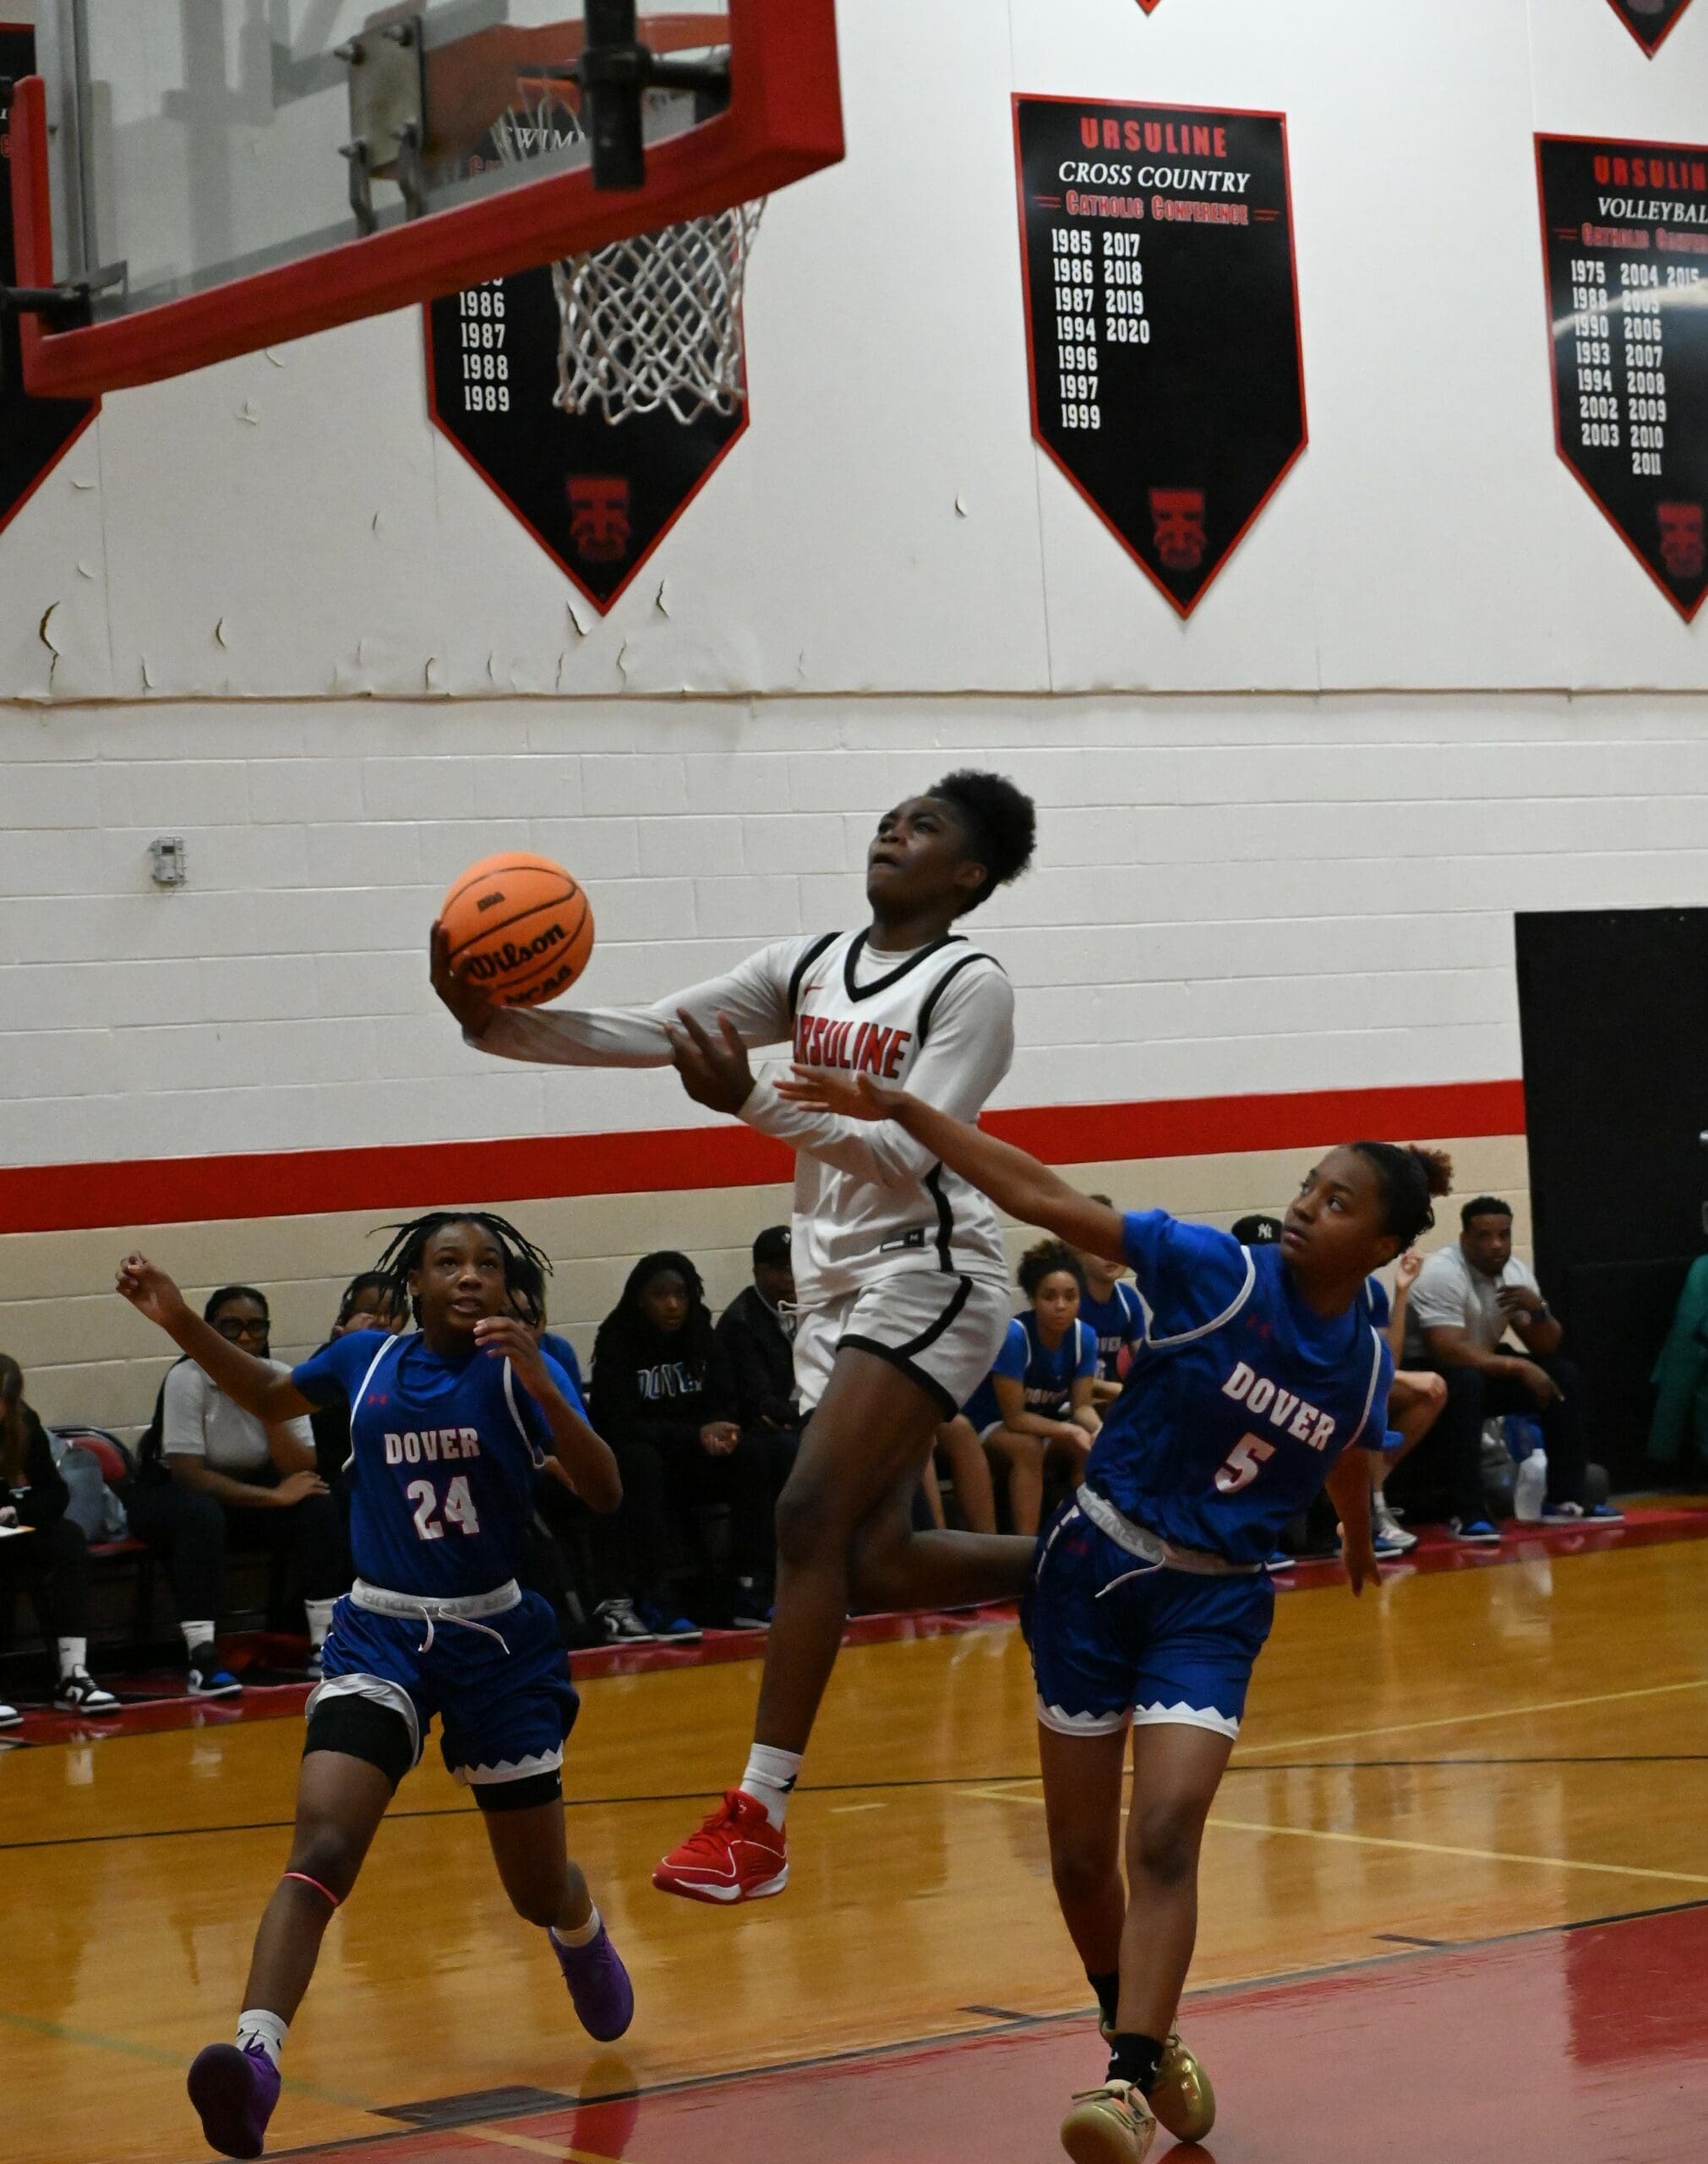 Ursuline girls basketball Jezelle GG Banks attempts a layup against Dover as she scored 32 points in the game photo courtesy of Nick Halliday scaled